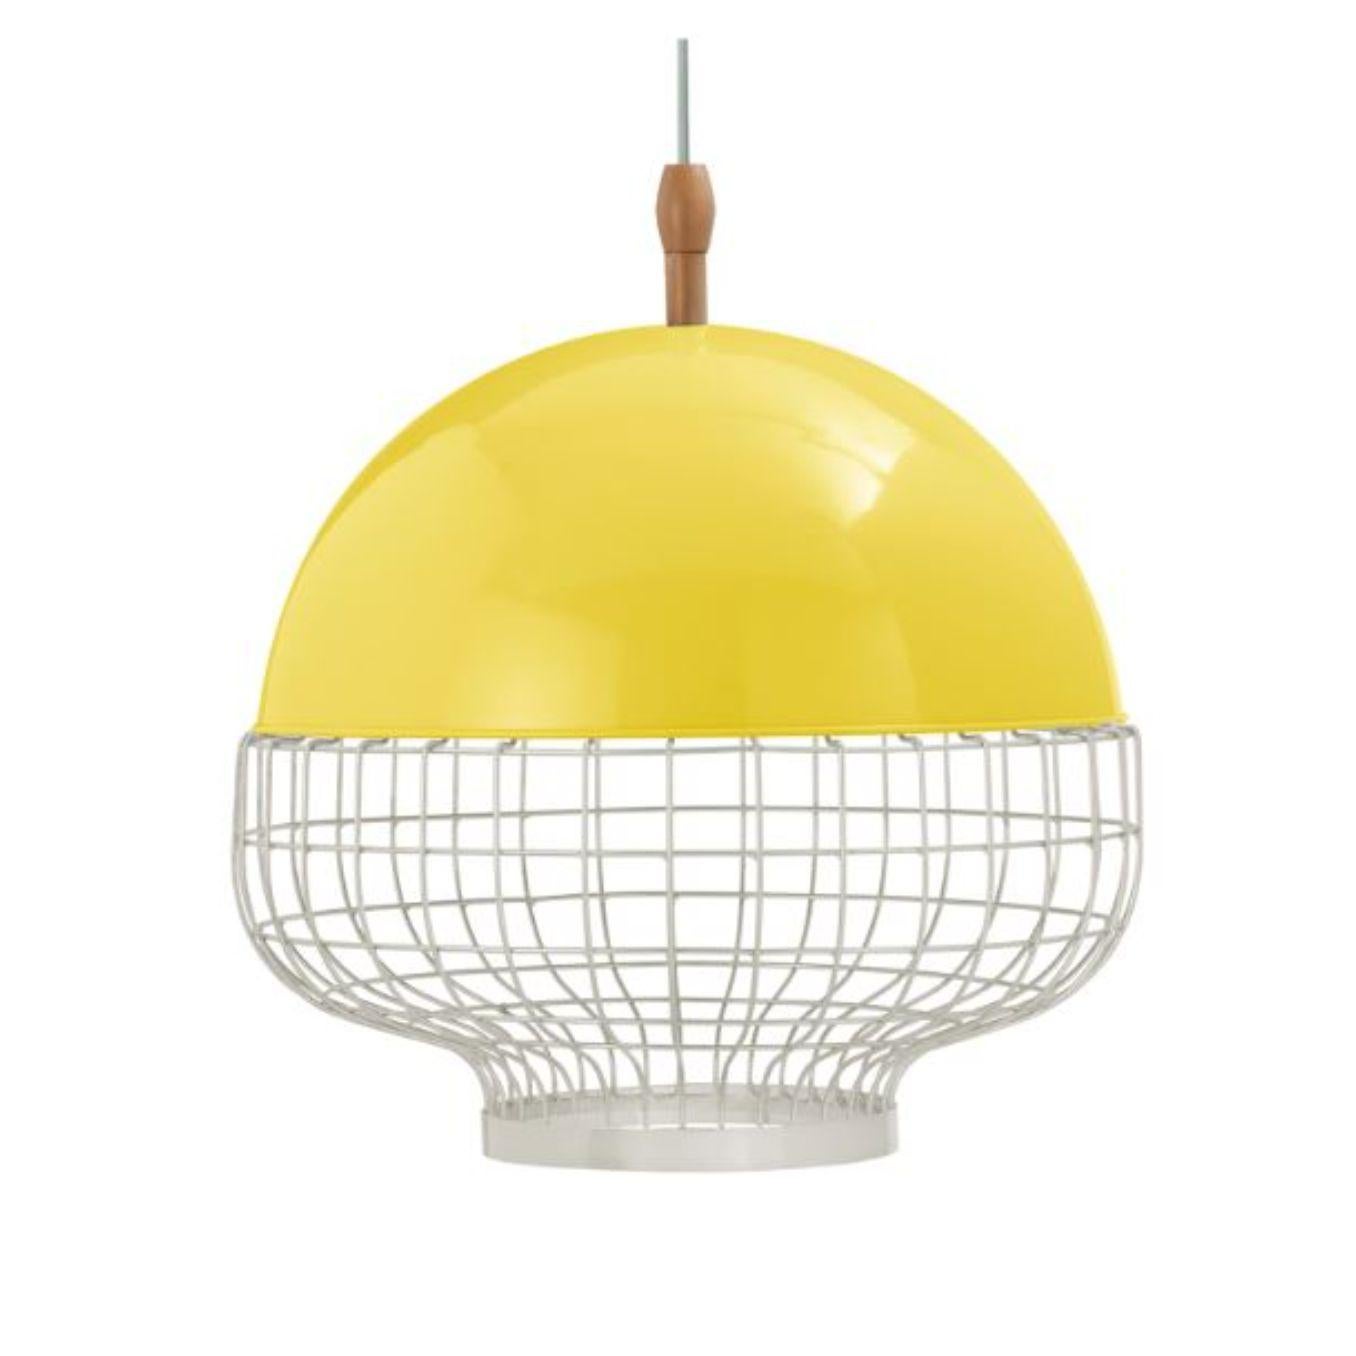 Yellow Magnolia I suspension lamp by Dooq.
Dimensions: W 65 x D 65 x H 57 cm.
Materials: lacquered metal, polished or brushed metal.
Also available in different colours and materials.

Information:
230V/50Hz
E27/1x20W